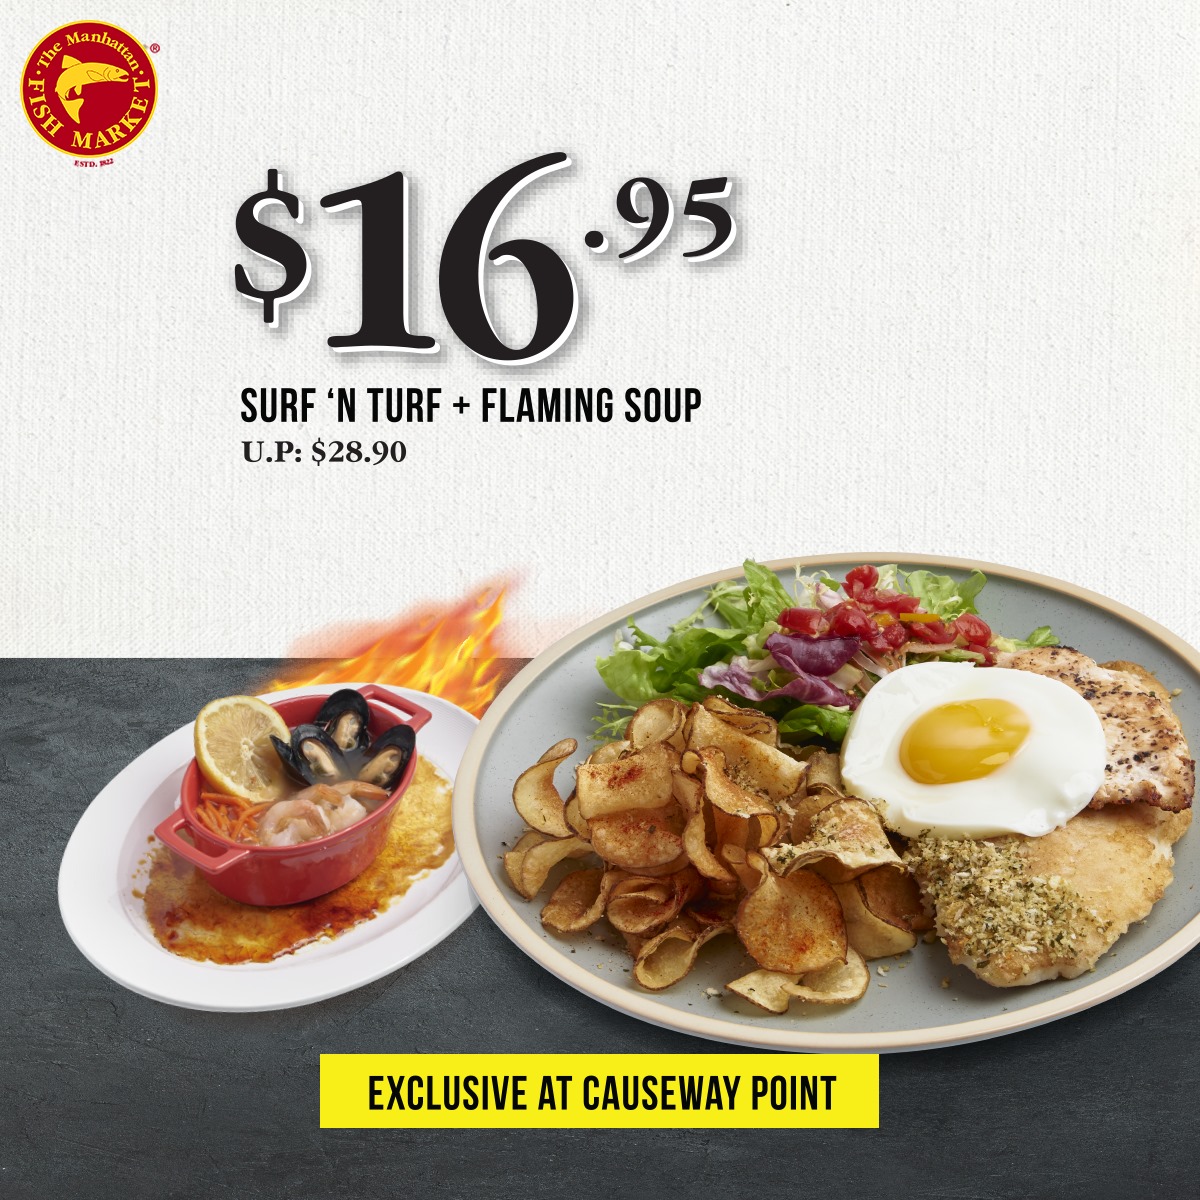 Flash these coupons from The Manhattan FISH MARKET on your mobile devices to enjoy great savings - 9